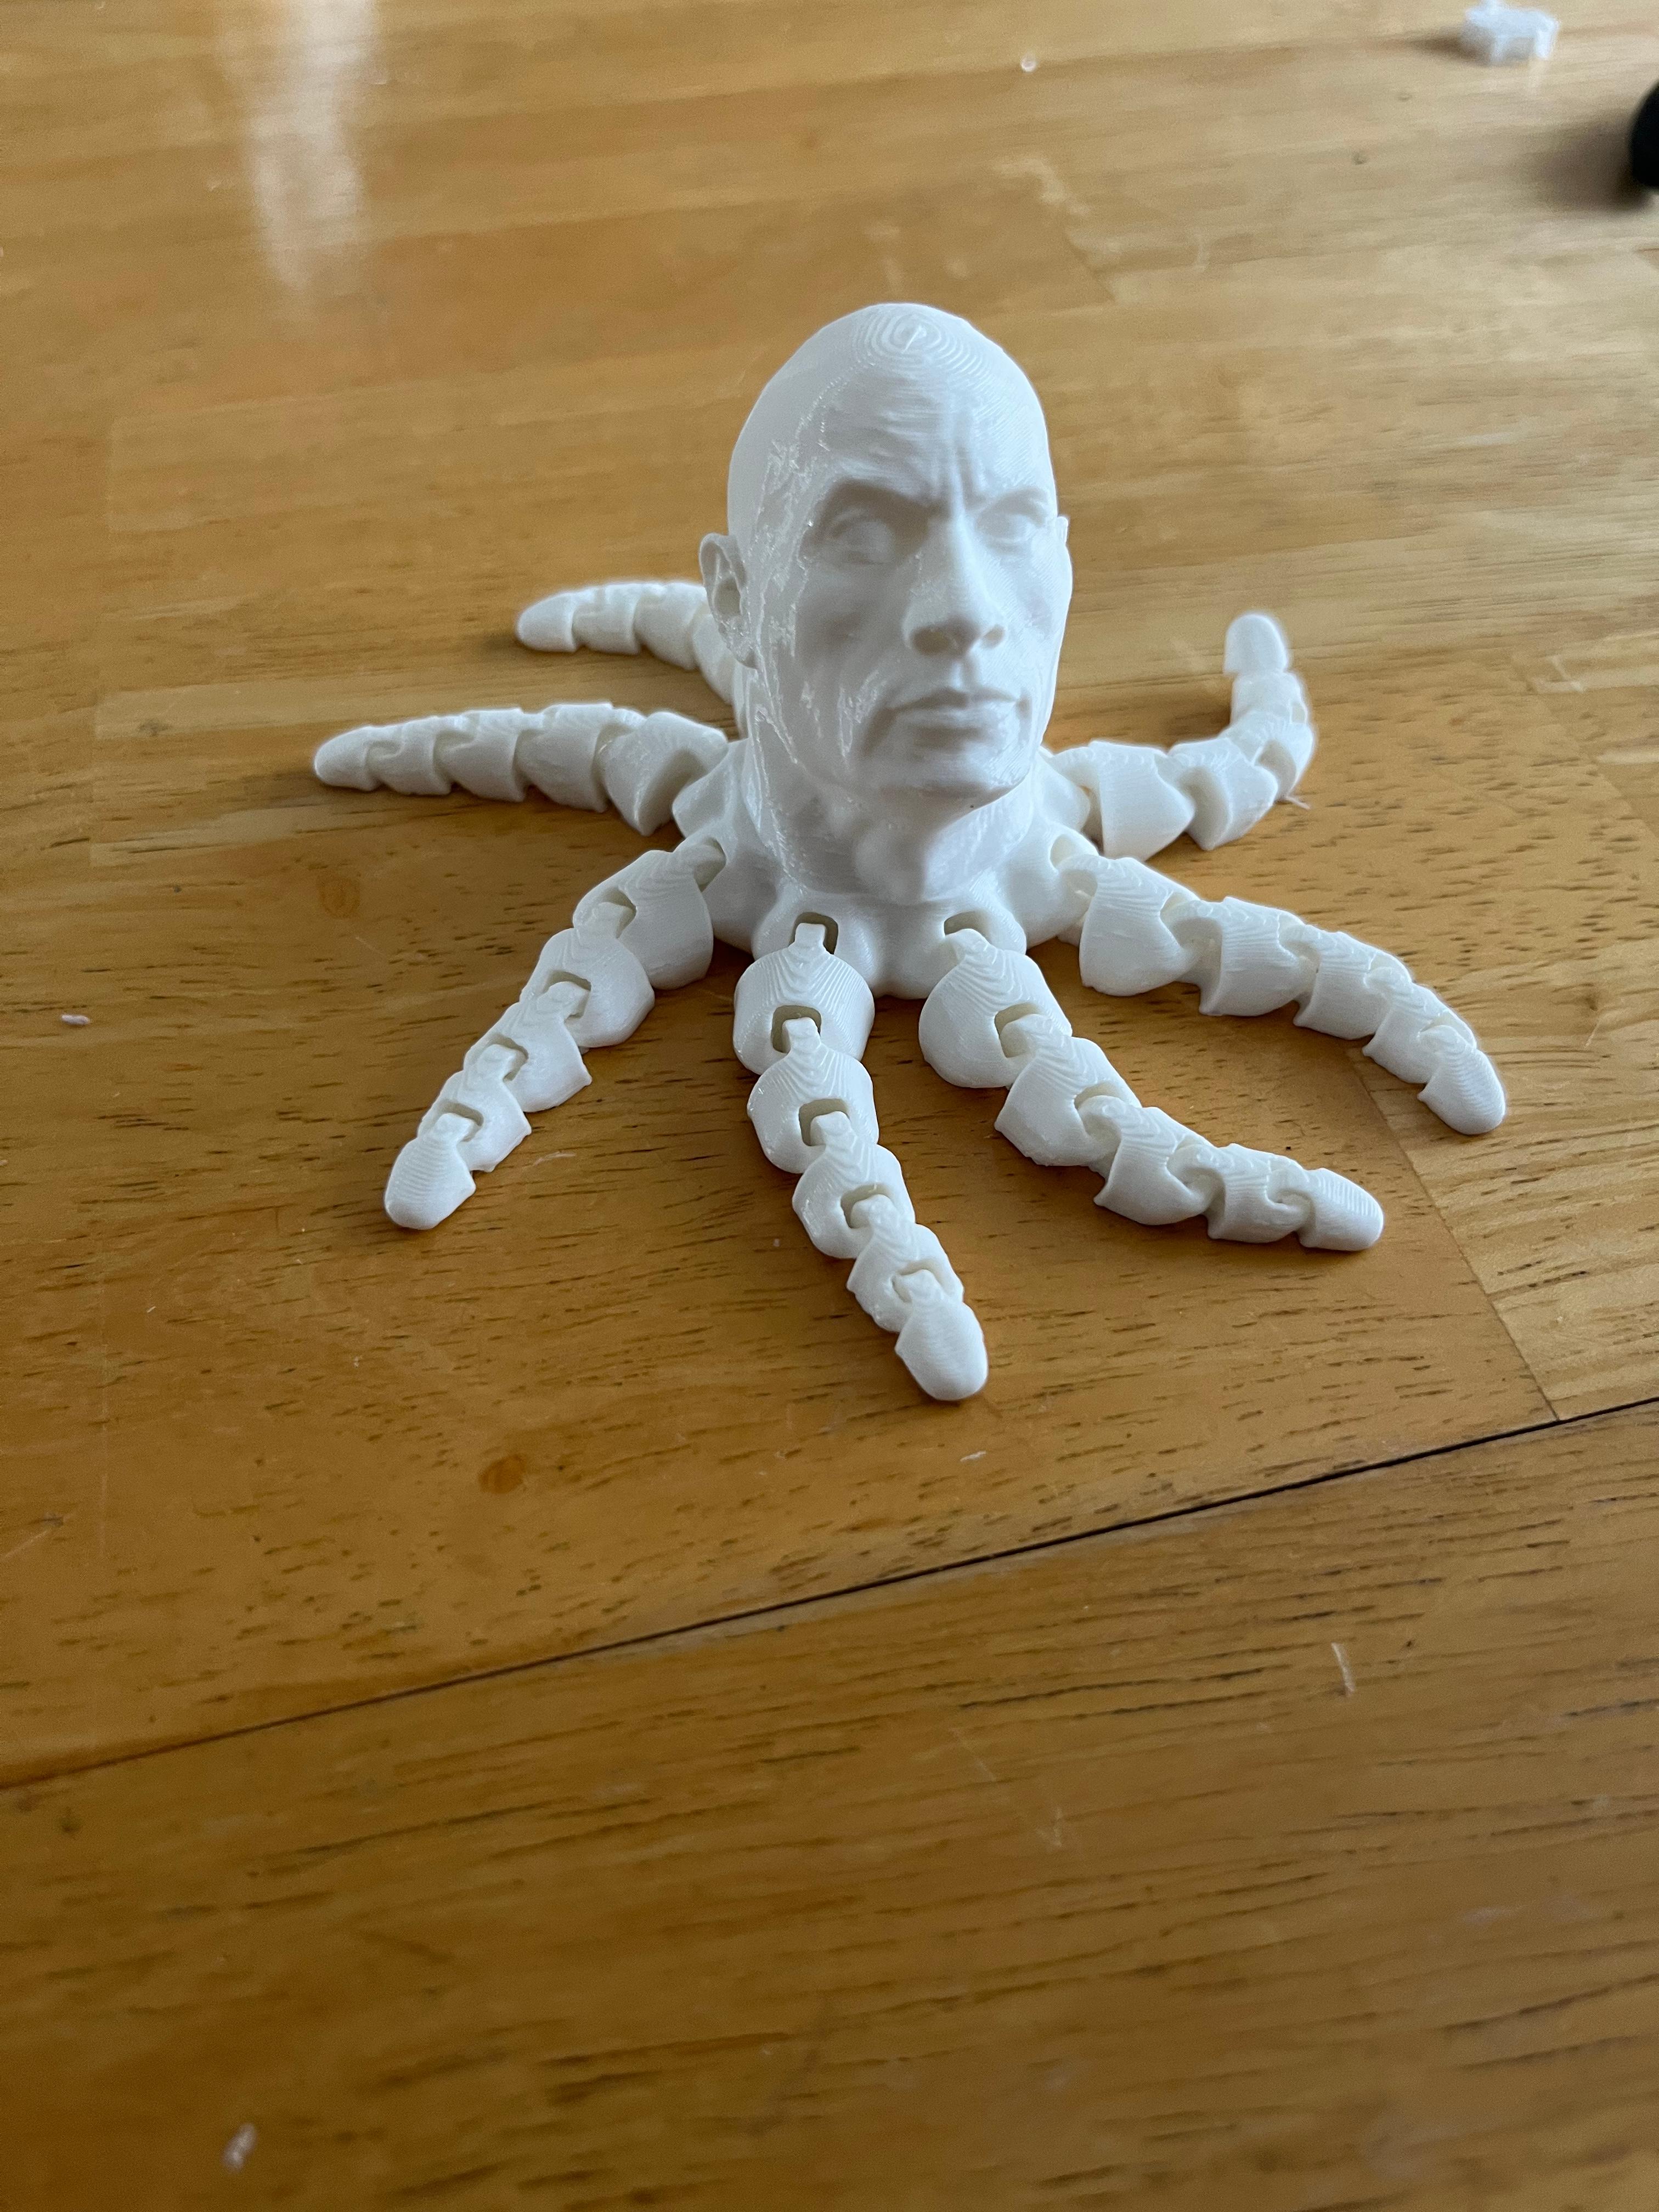 The Rocktopus - Just finished. Very smooth model! - 3d model